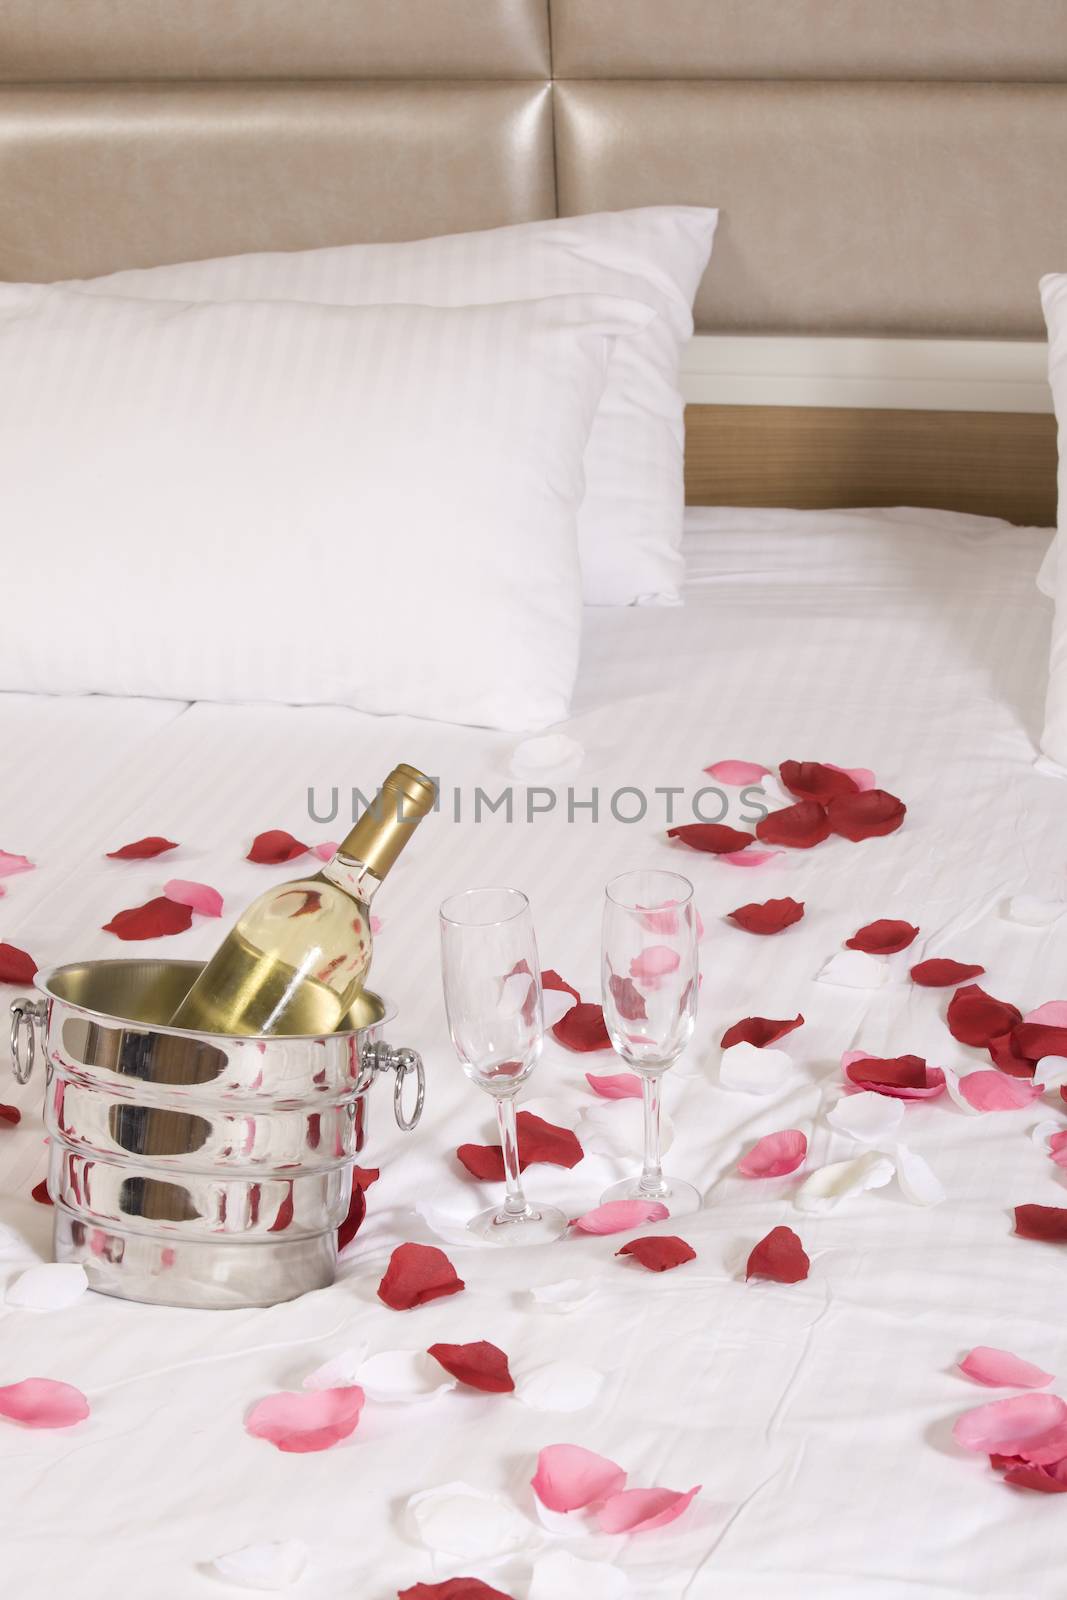 wine in bed to celebrate Valentine's Day at hotel room